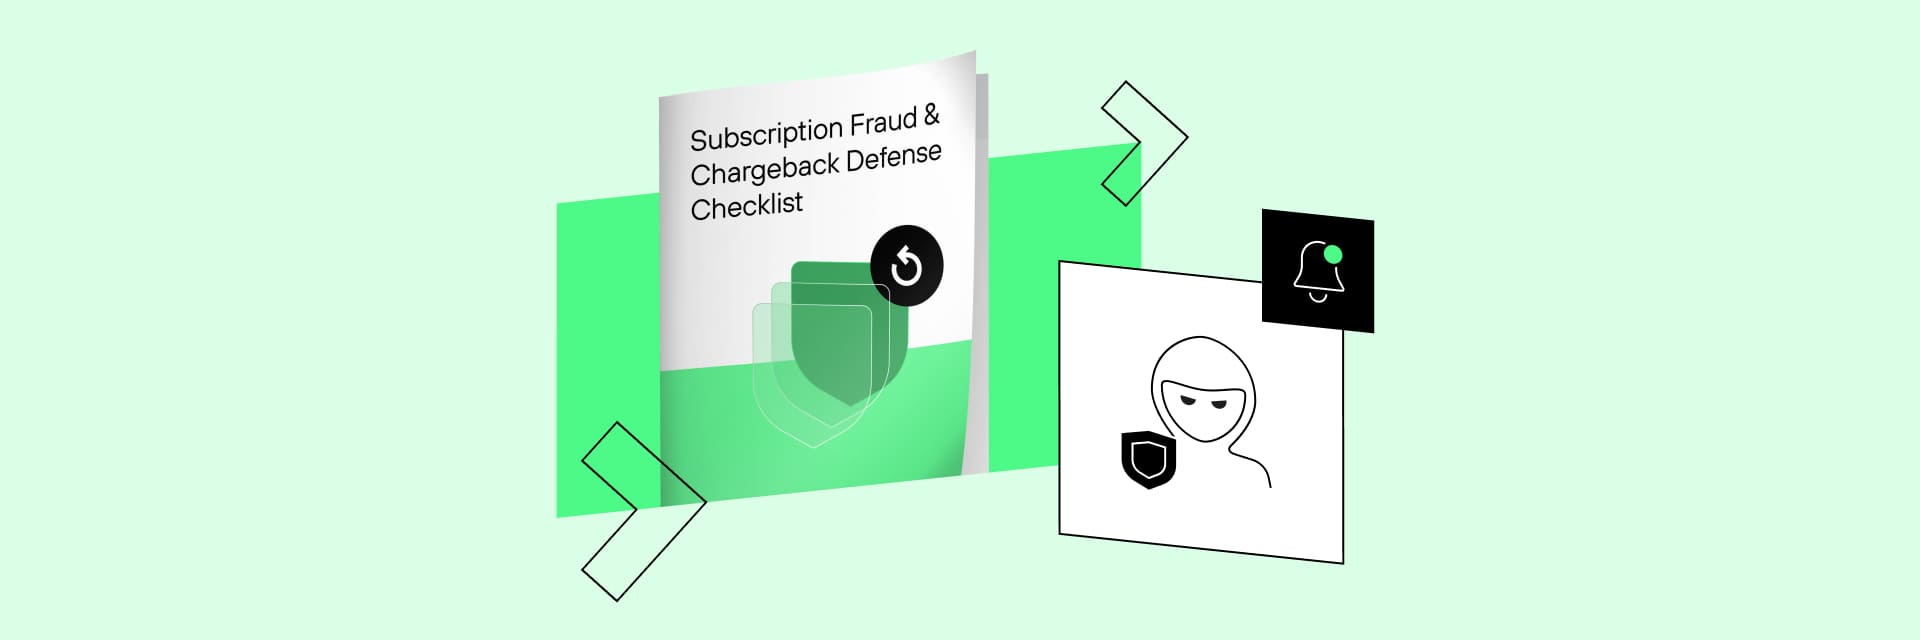 Subscription Fraud and Chargeback Defense Checklist [PDF]